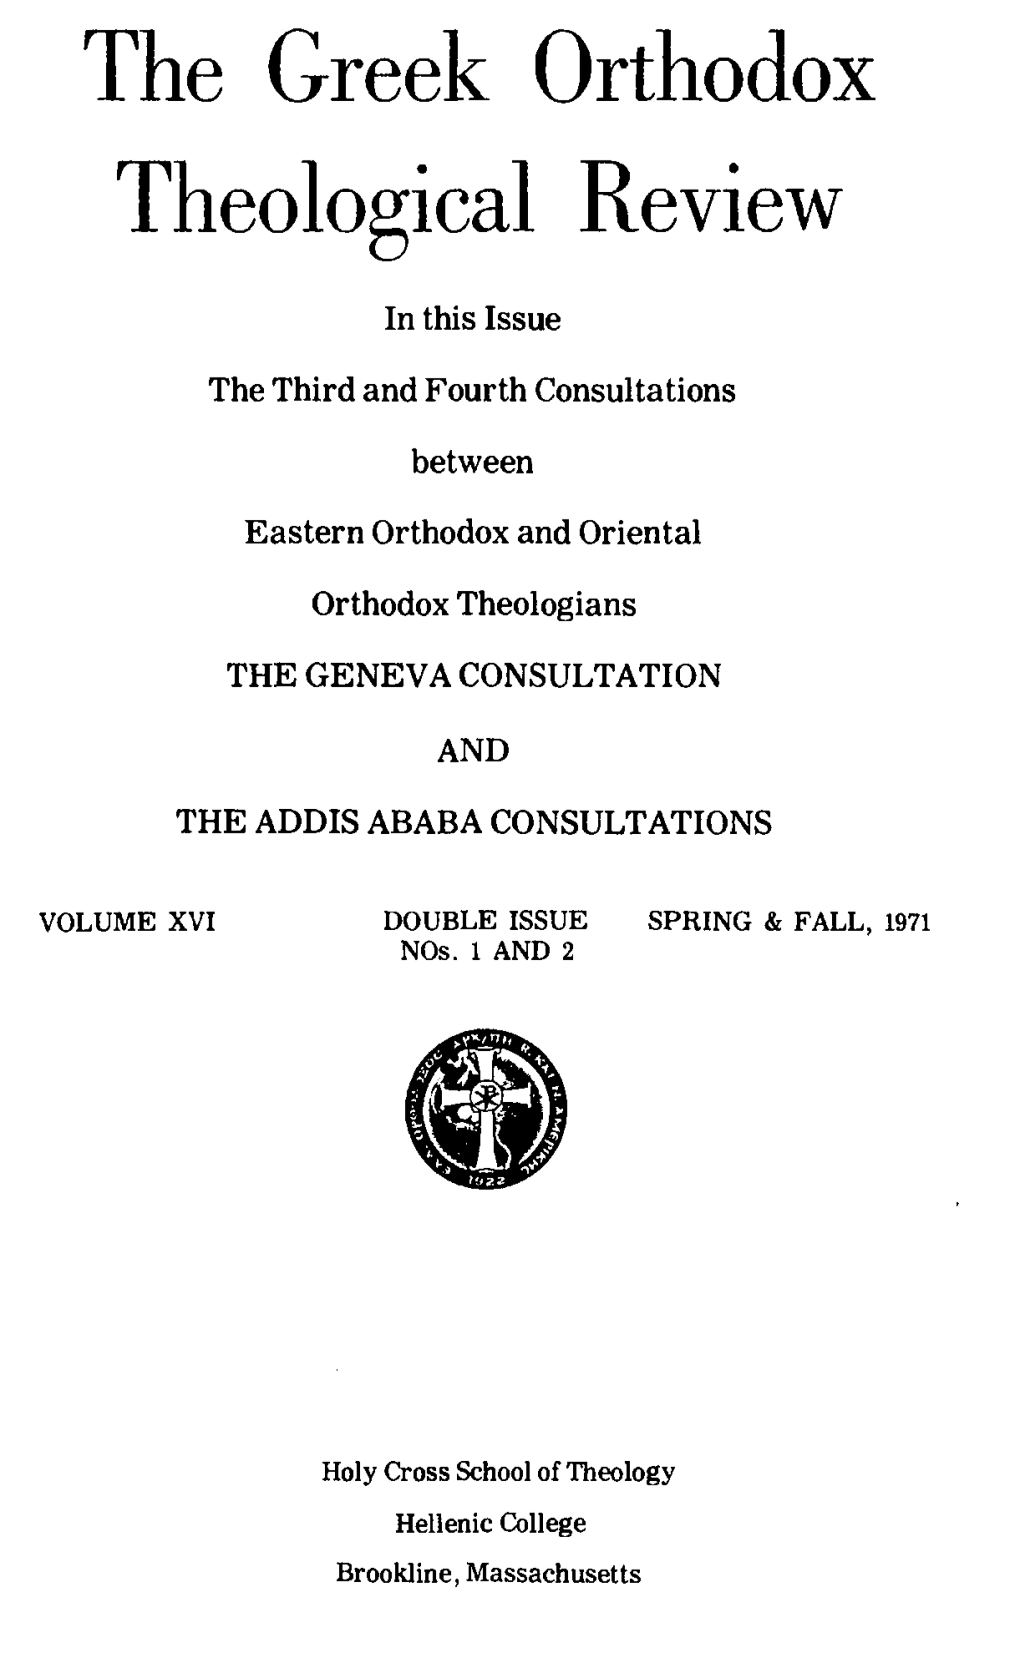 Unofficial Consultation 1970 Geneva and 1971 Addis Ababa